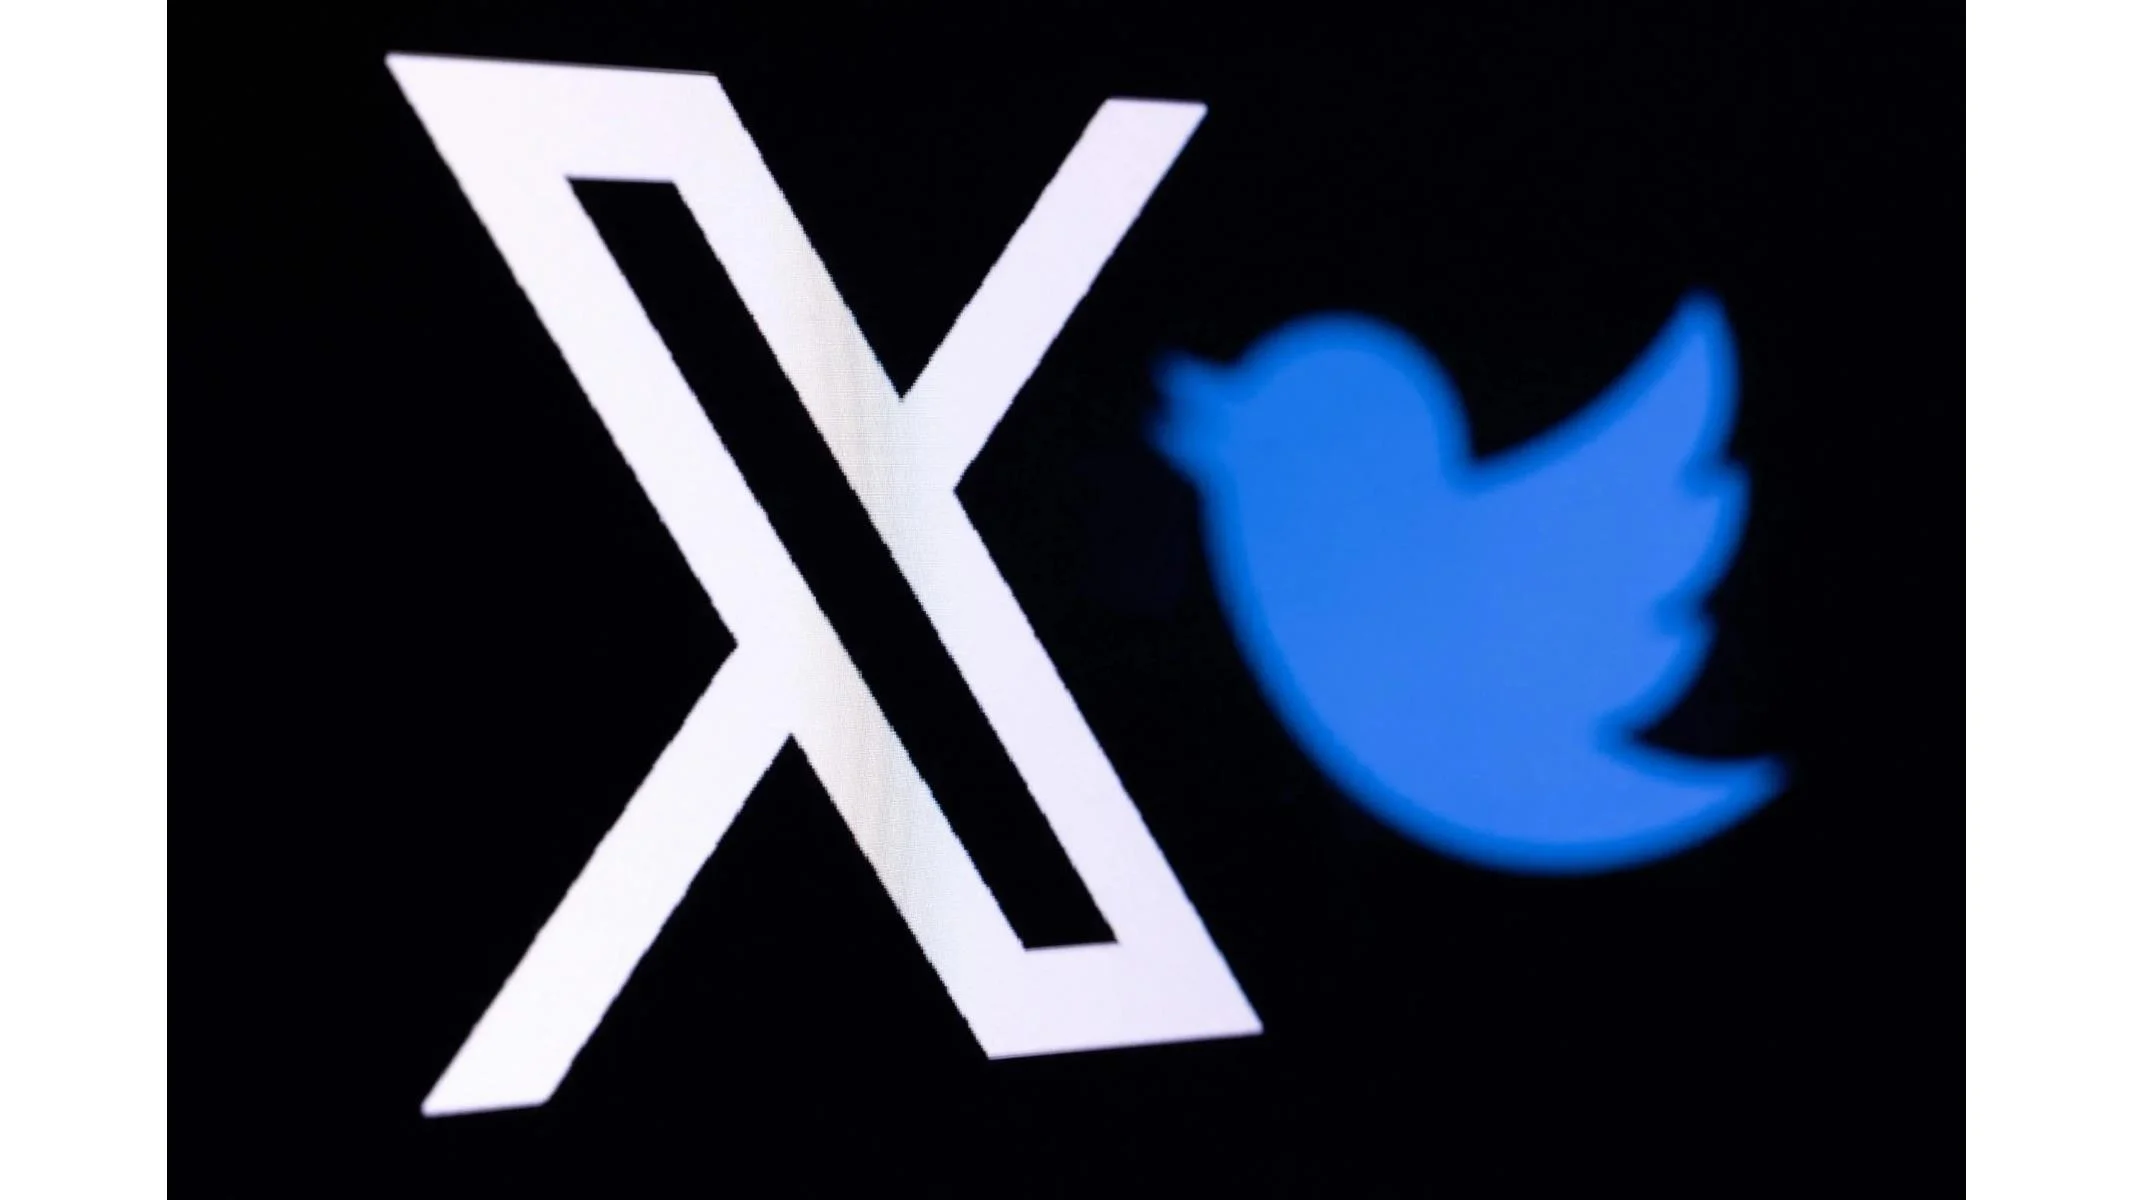 twitter is now 'X'